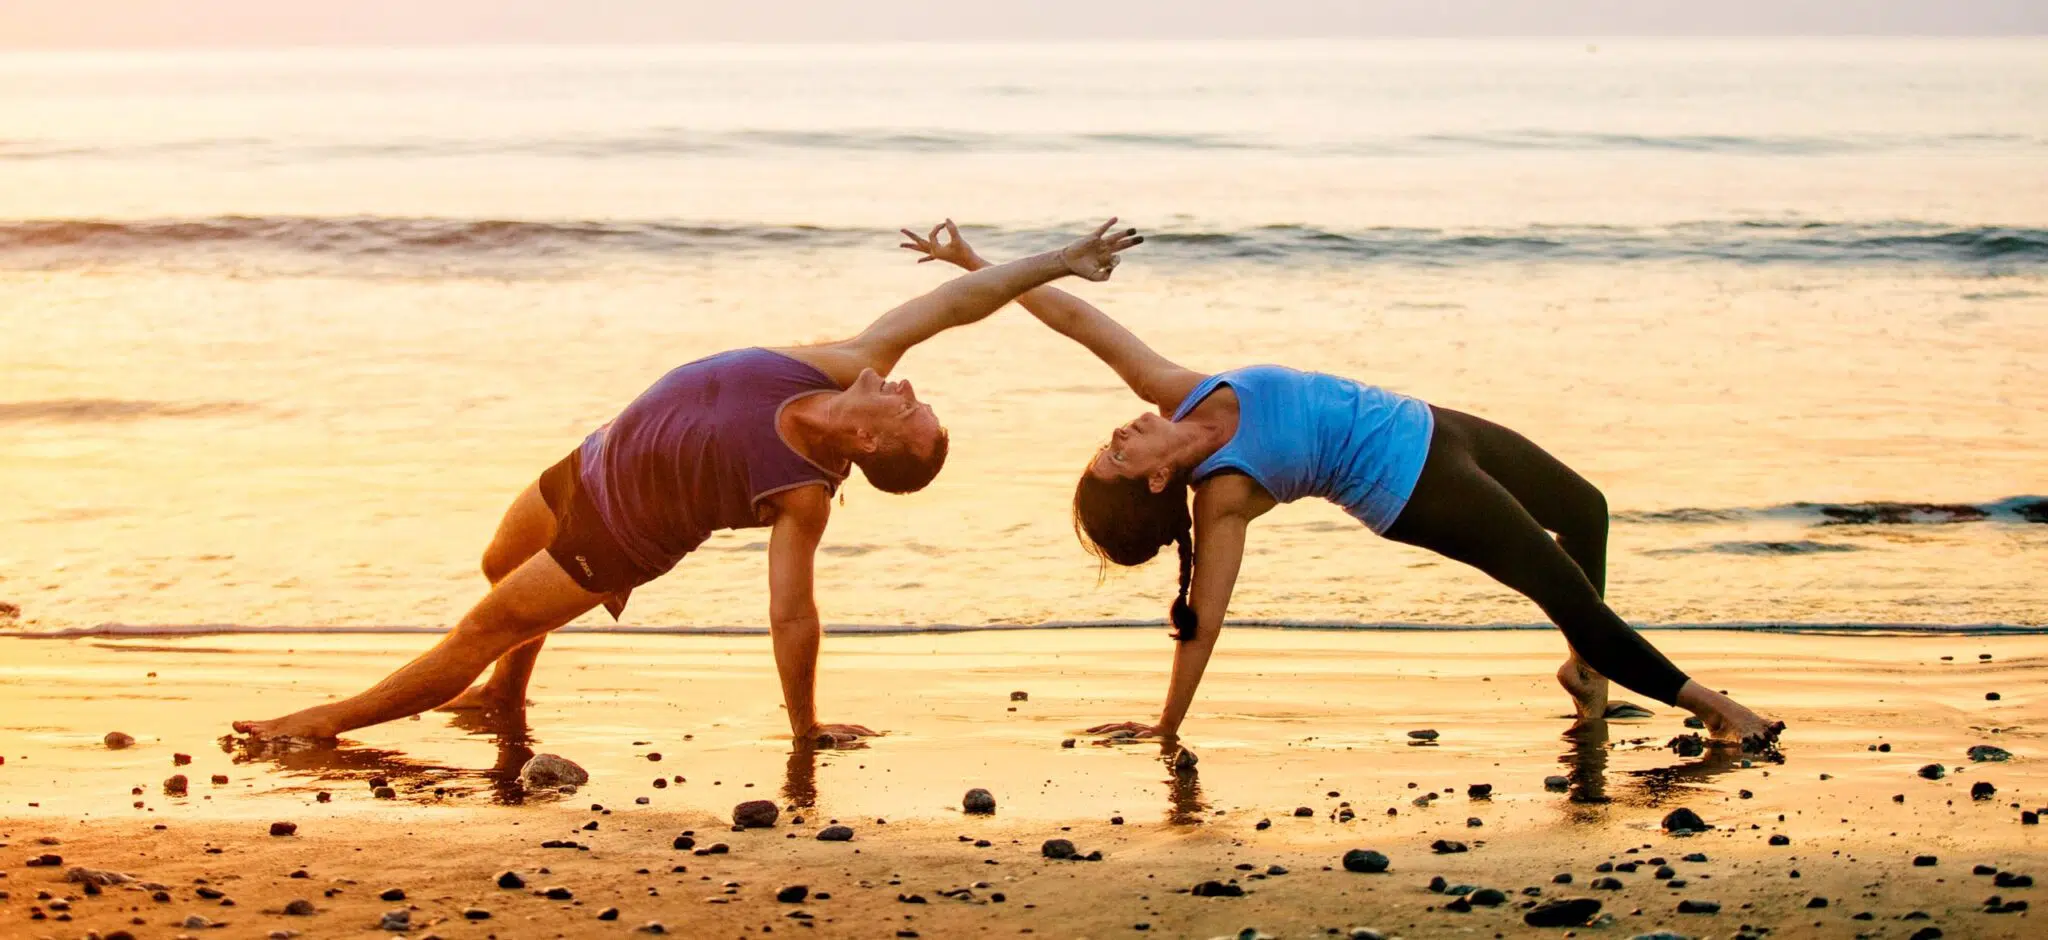 The greatest yoga poses for two people.